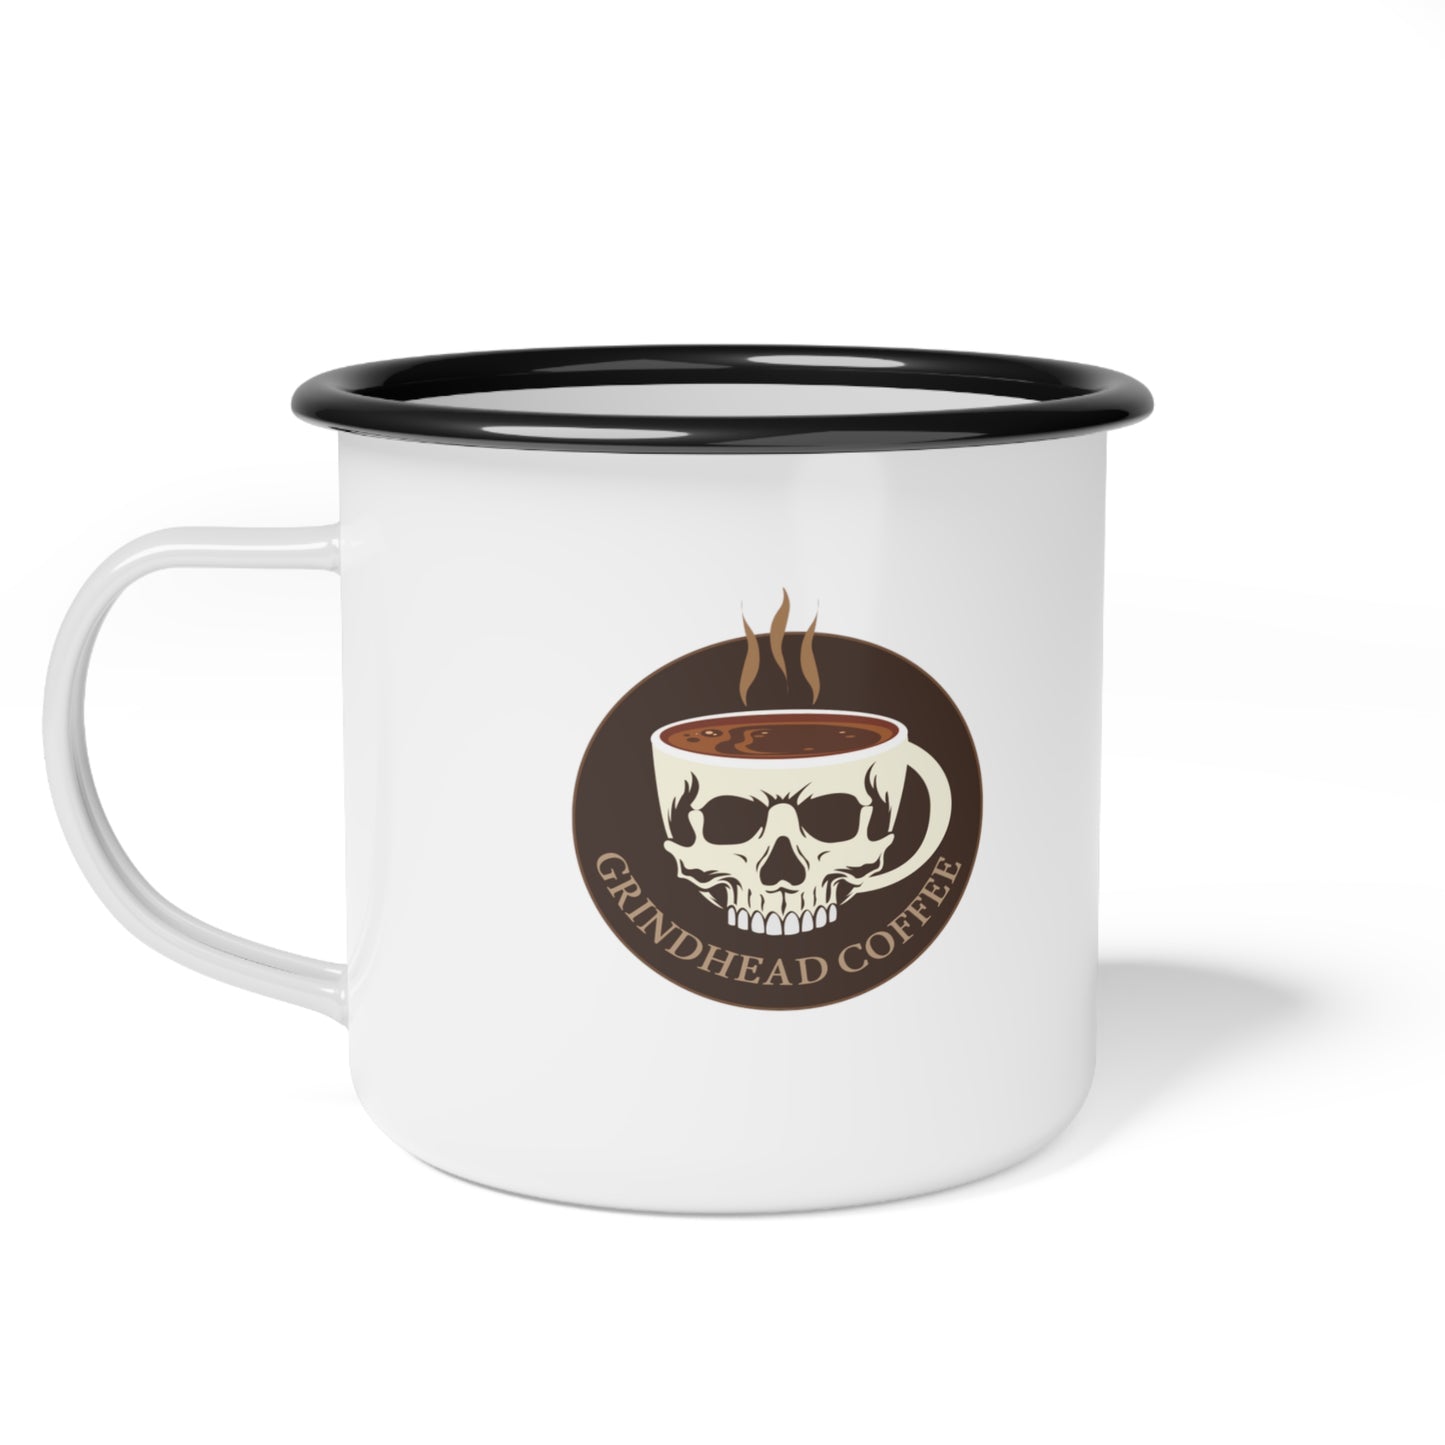 Enamel Camp Cup - Grindhead Logo - Free Shipping - Double Sided - 12oz